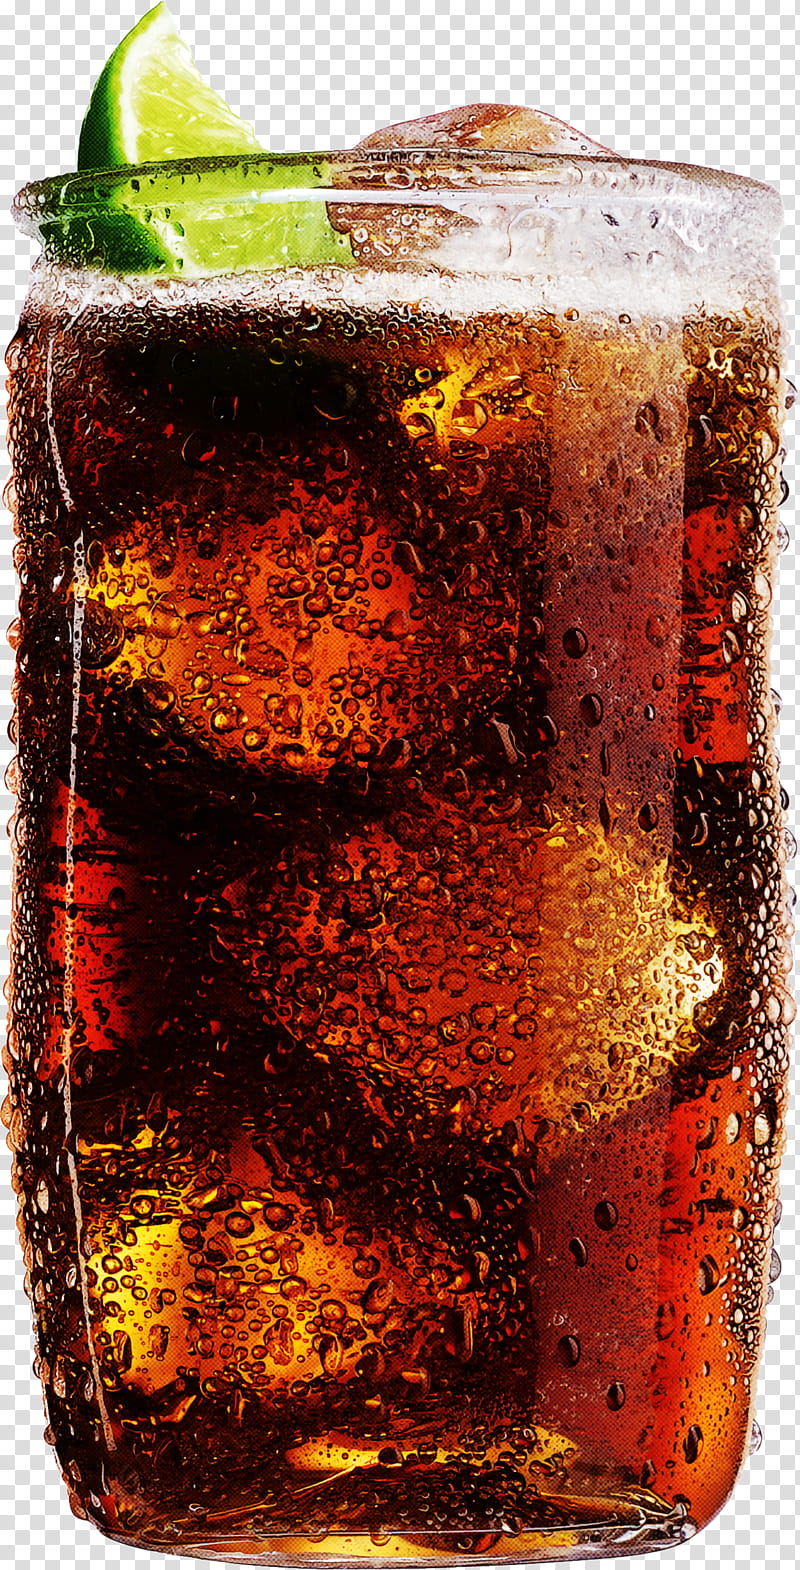 Coca-Cola, Rum And Coke, Long Island Iced Tea, Cocacola, Nonalcoholic Drink, Dark n Stormy, Soft Drink, Negroni transparent background PNG clipart